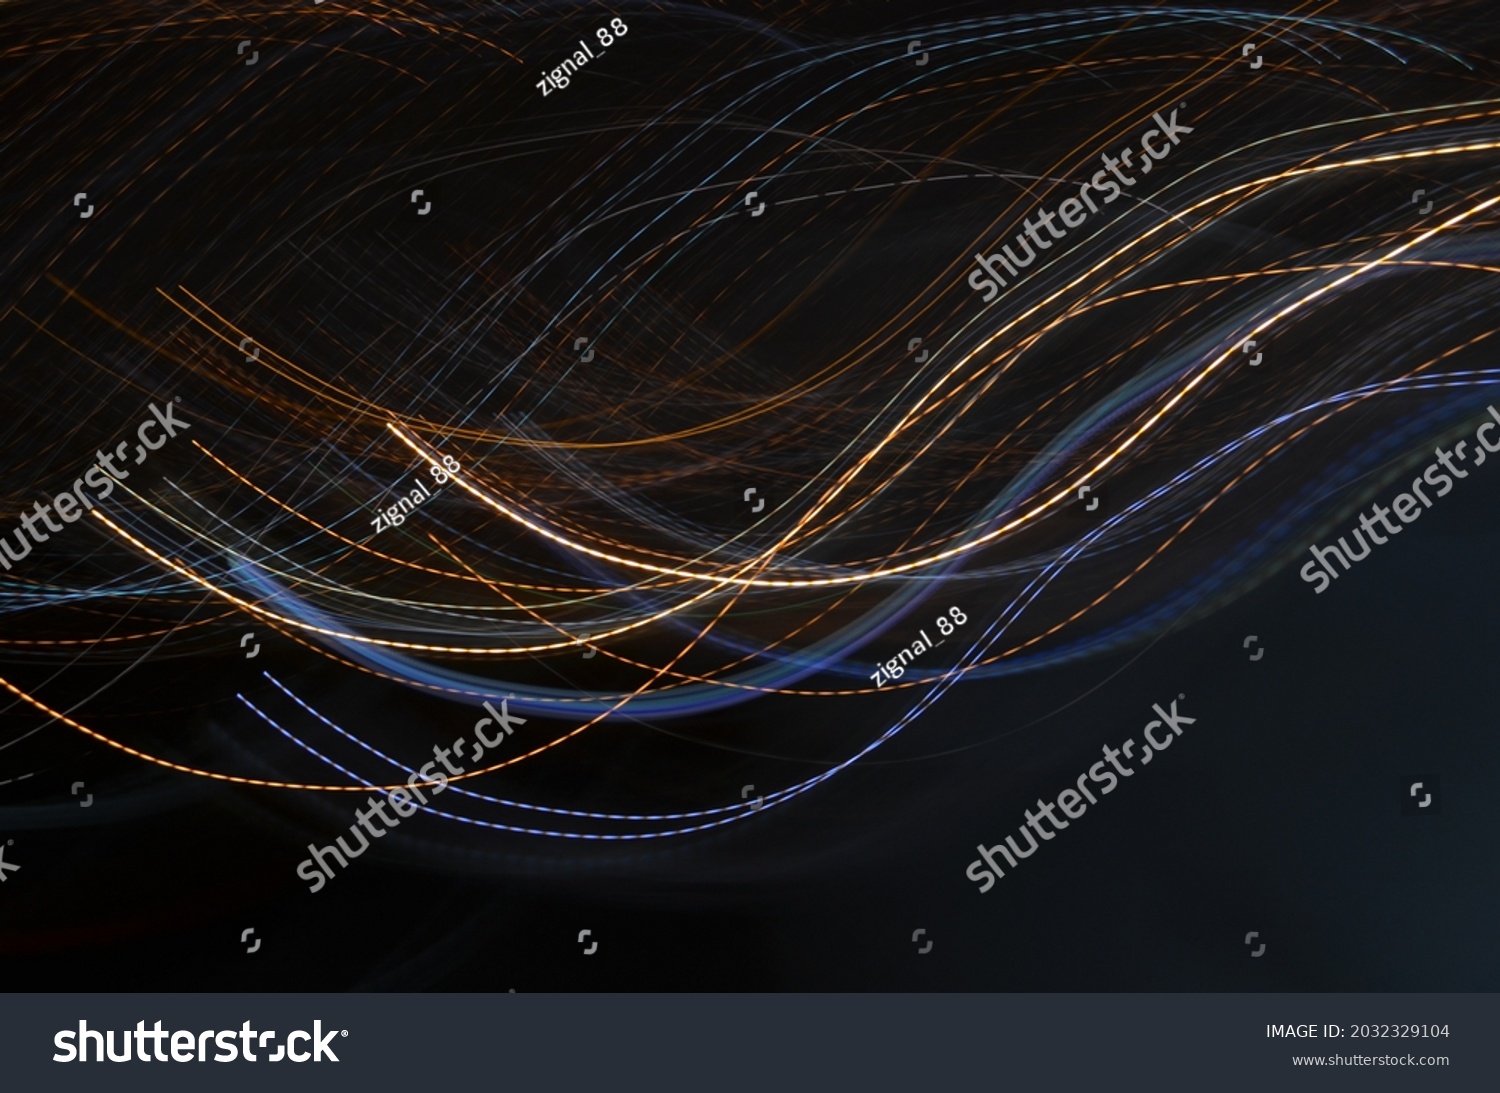 Photography line, Speed Lines, Stripes Seamless Pattern Design. Moving Fast Shooting Stars, Meteorites on Dark Space Background. Seamless Holiday, Fabric, Cover, Ad, Fashion Pattern. #2032329104